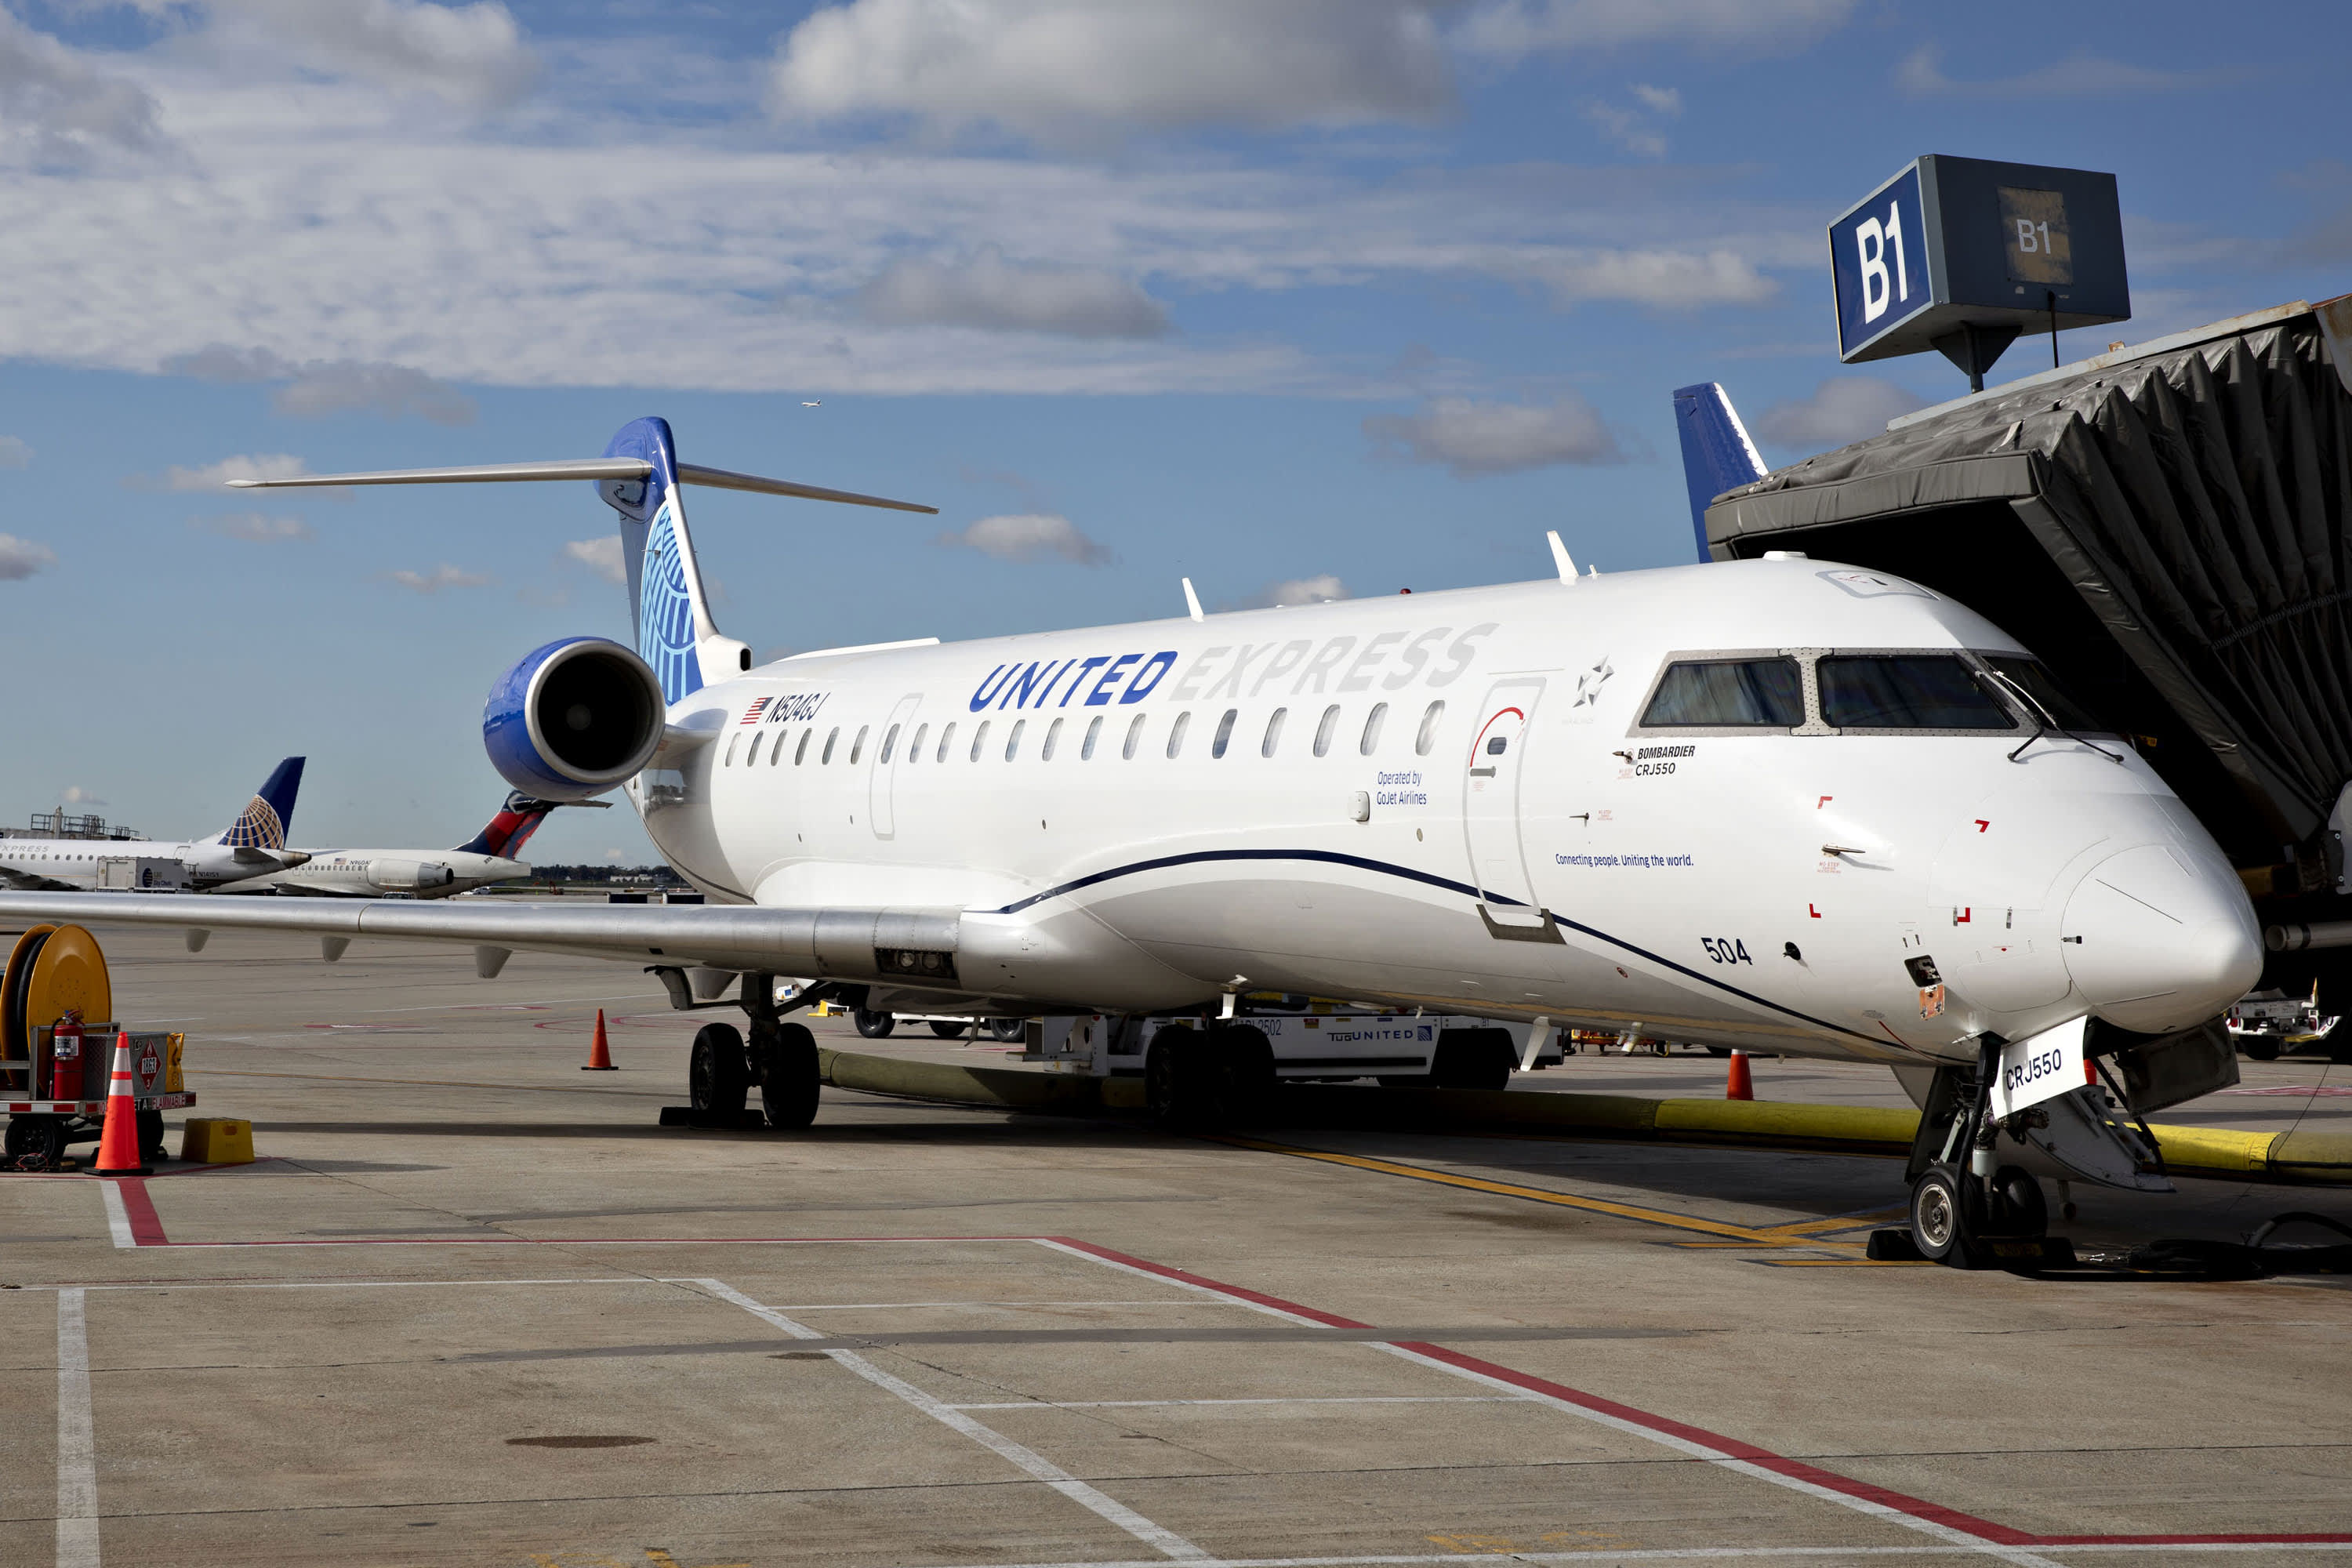 United is targeting Midwestern tourists as the summer program grows